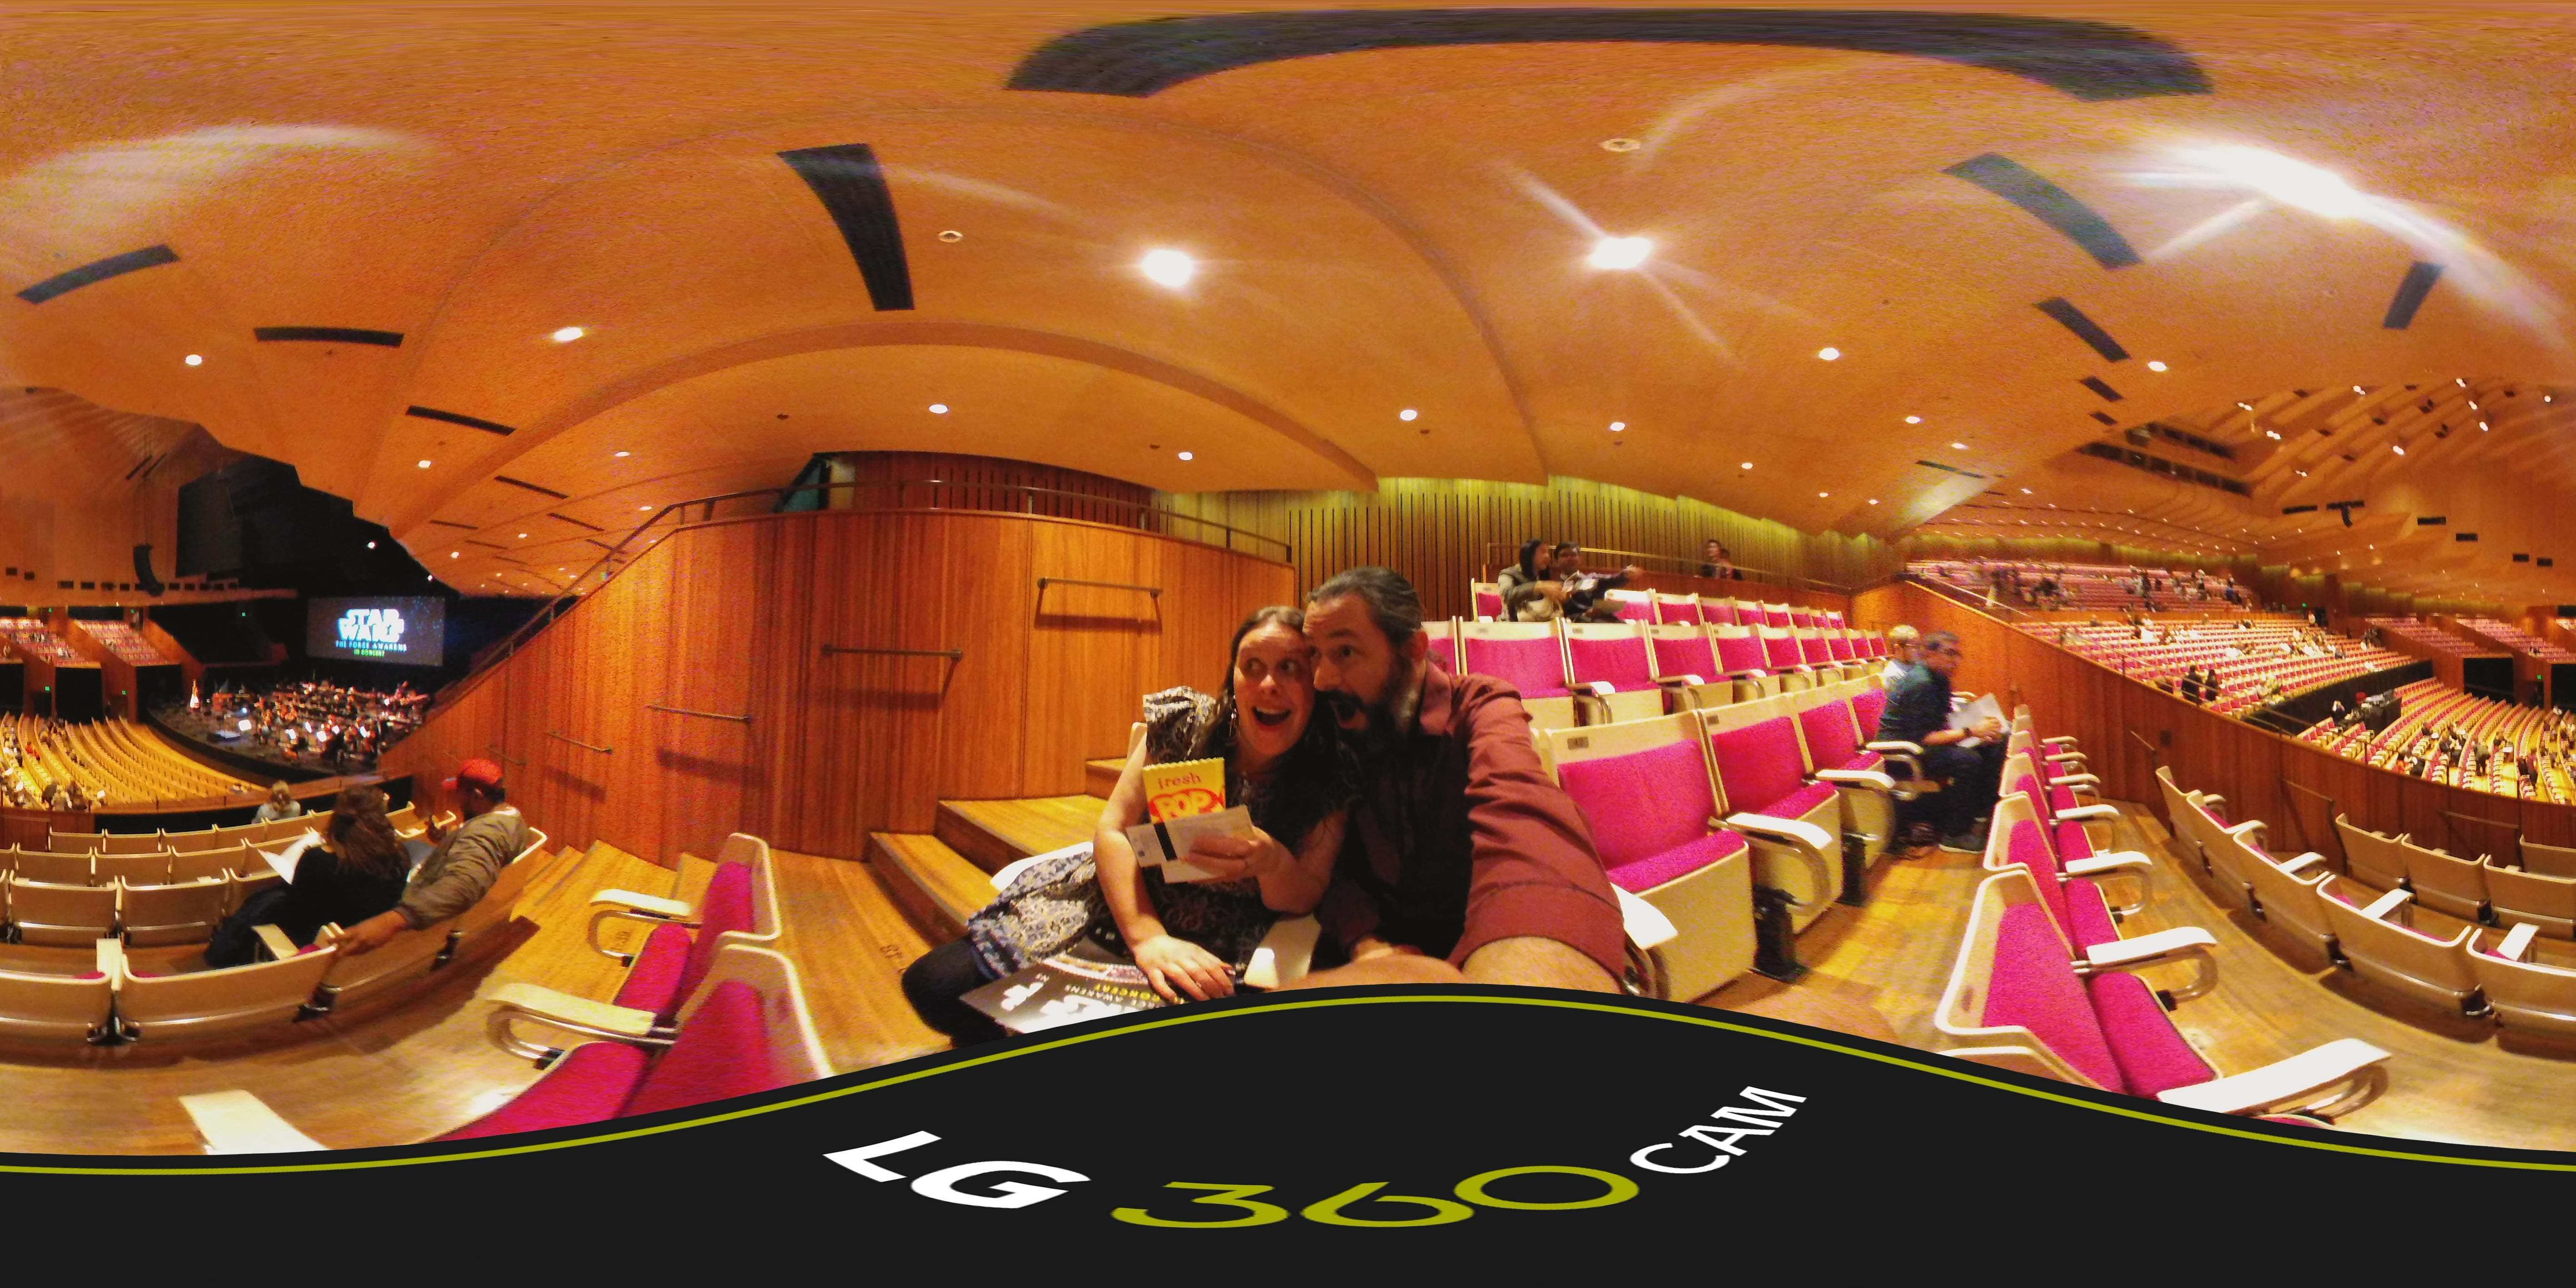 360 view of the inside of the concert hall.